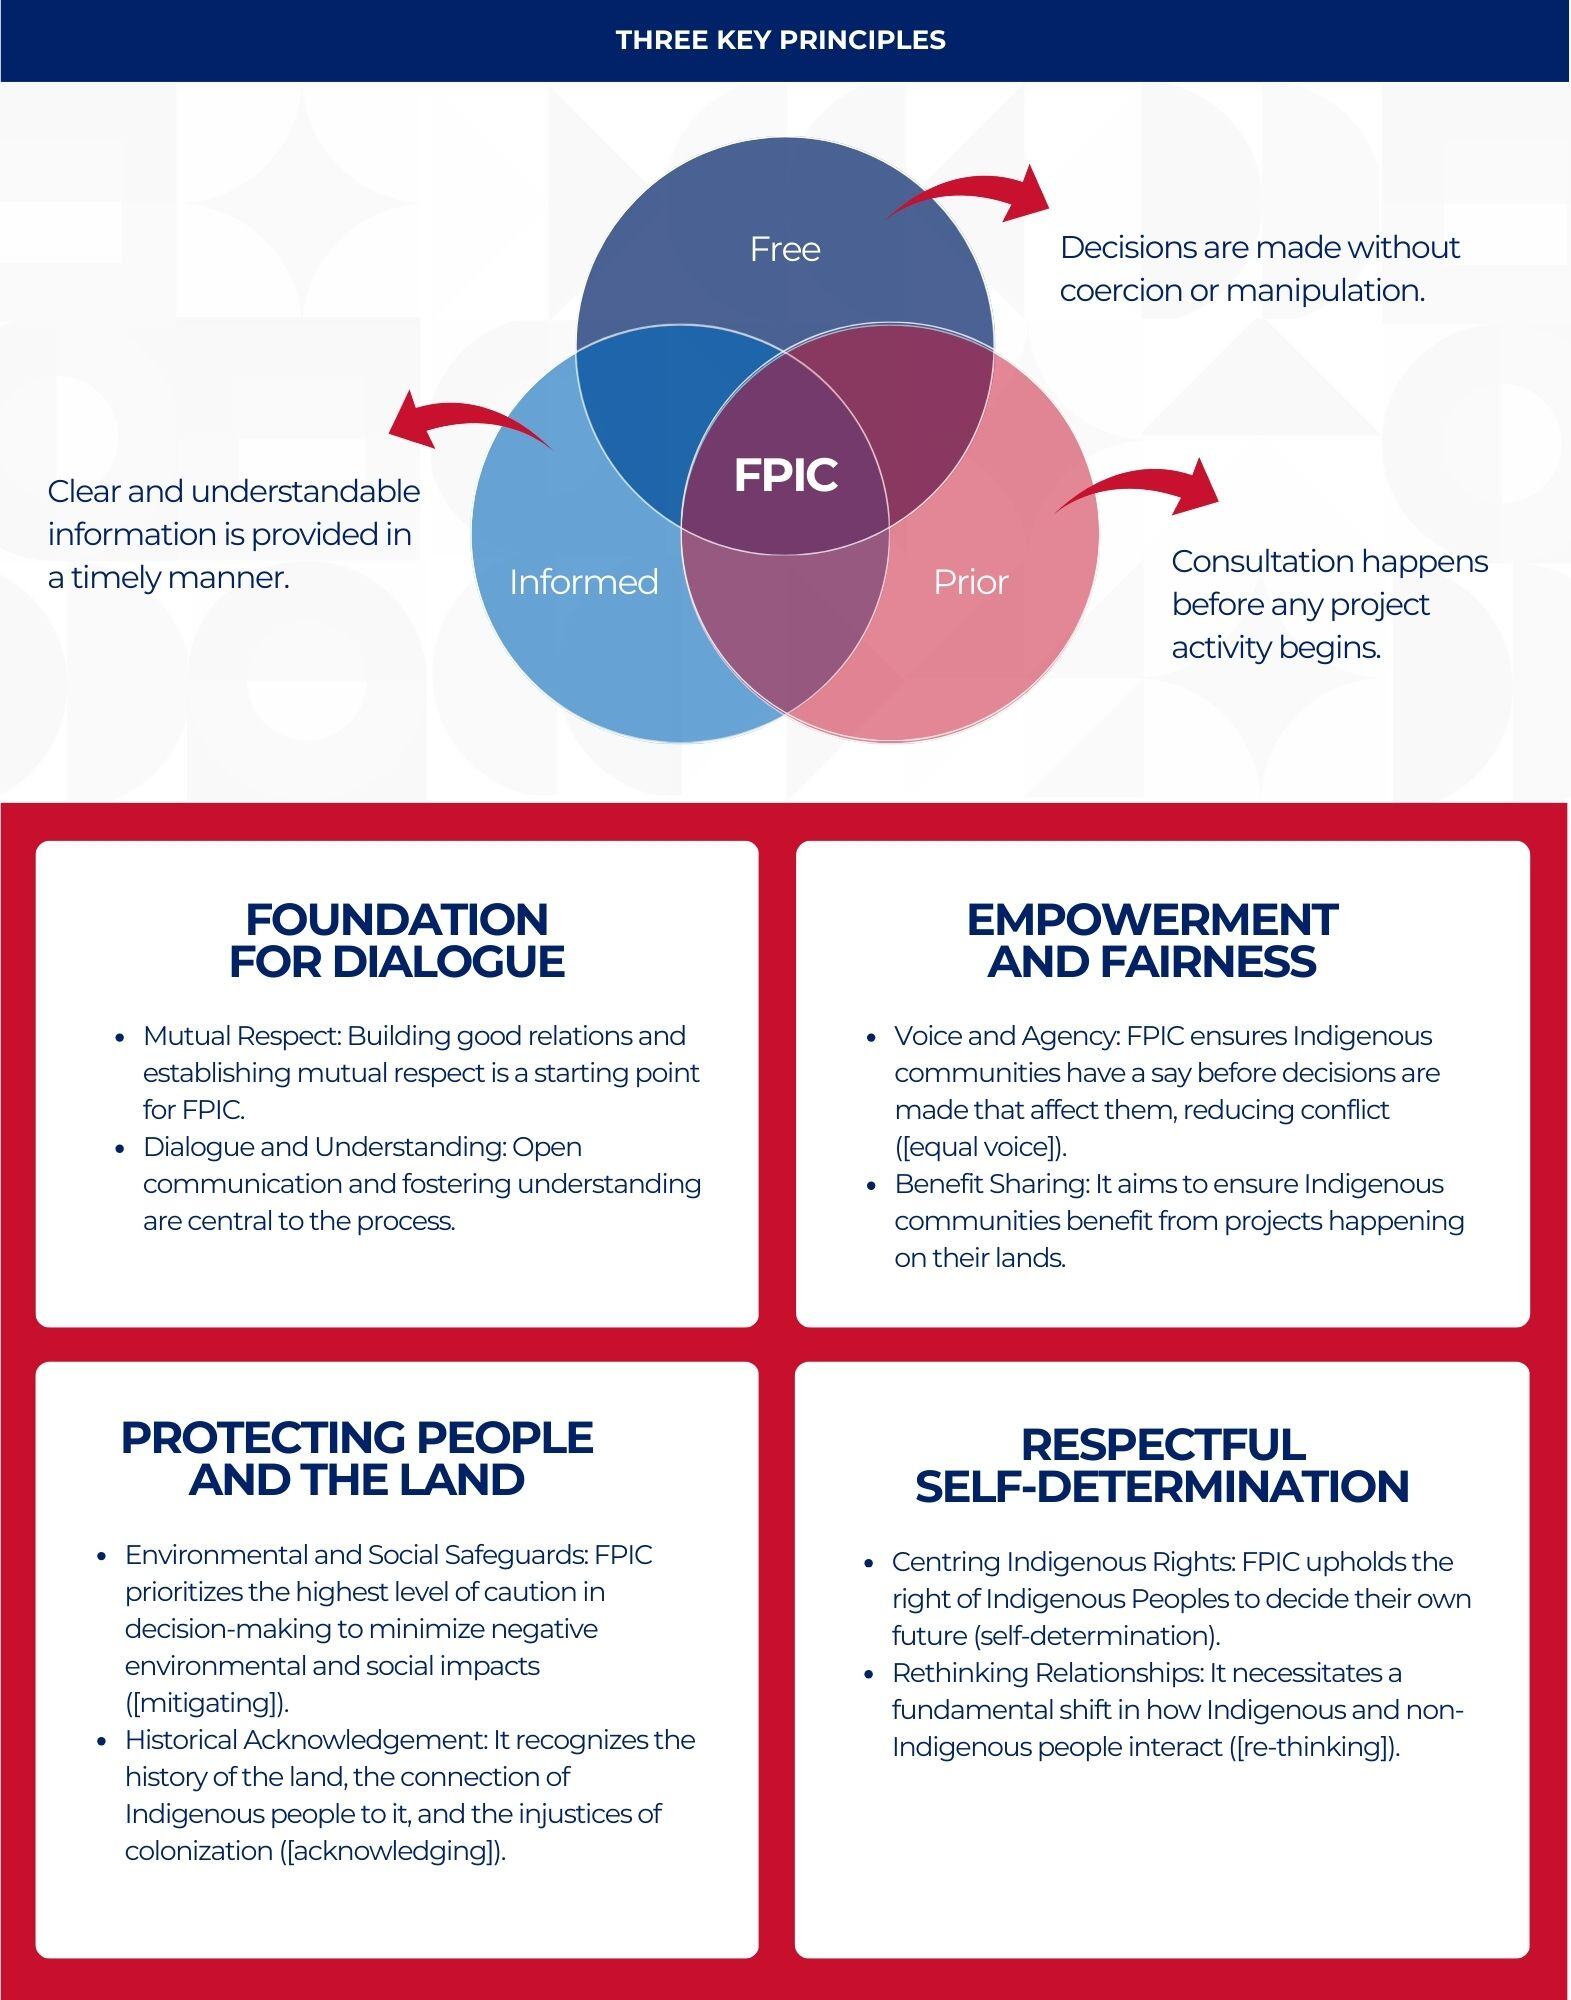 Free, Prior, and Informed Consent (FPIC)